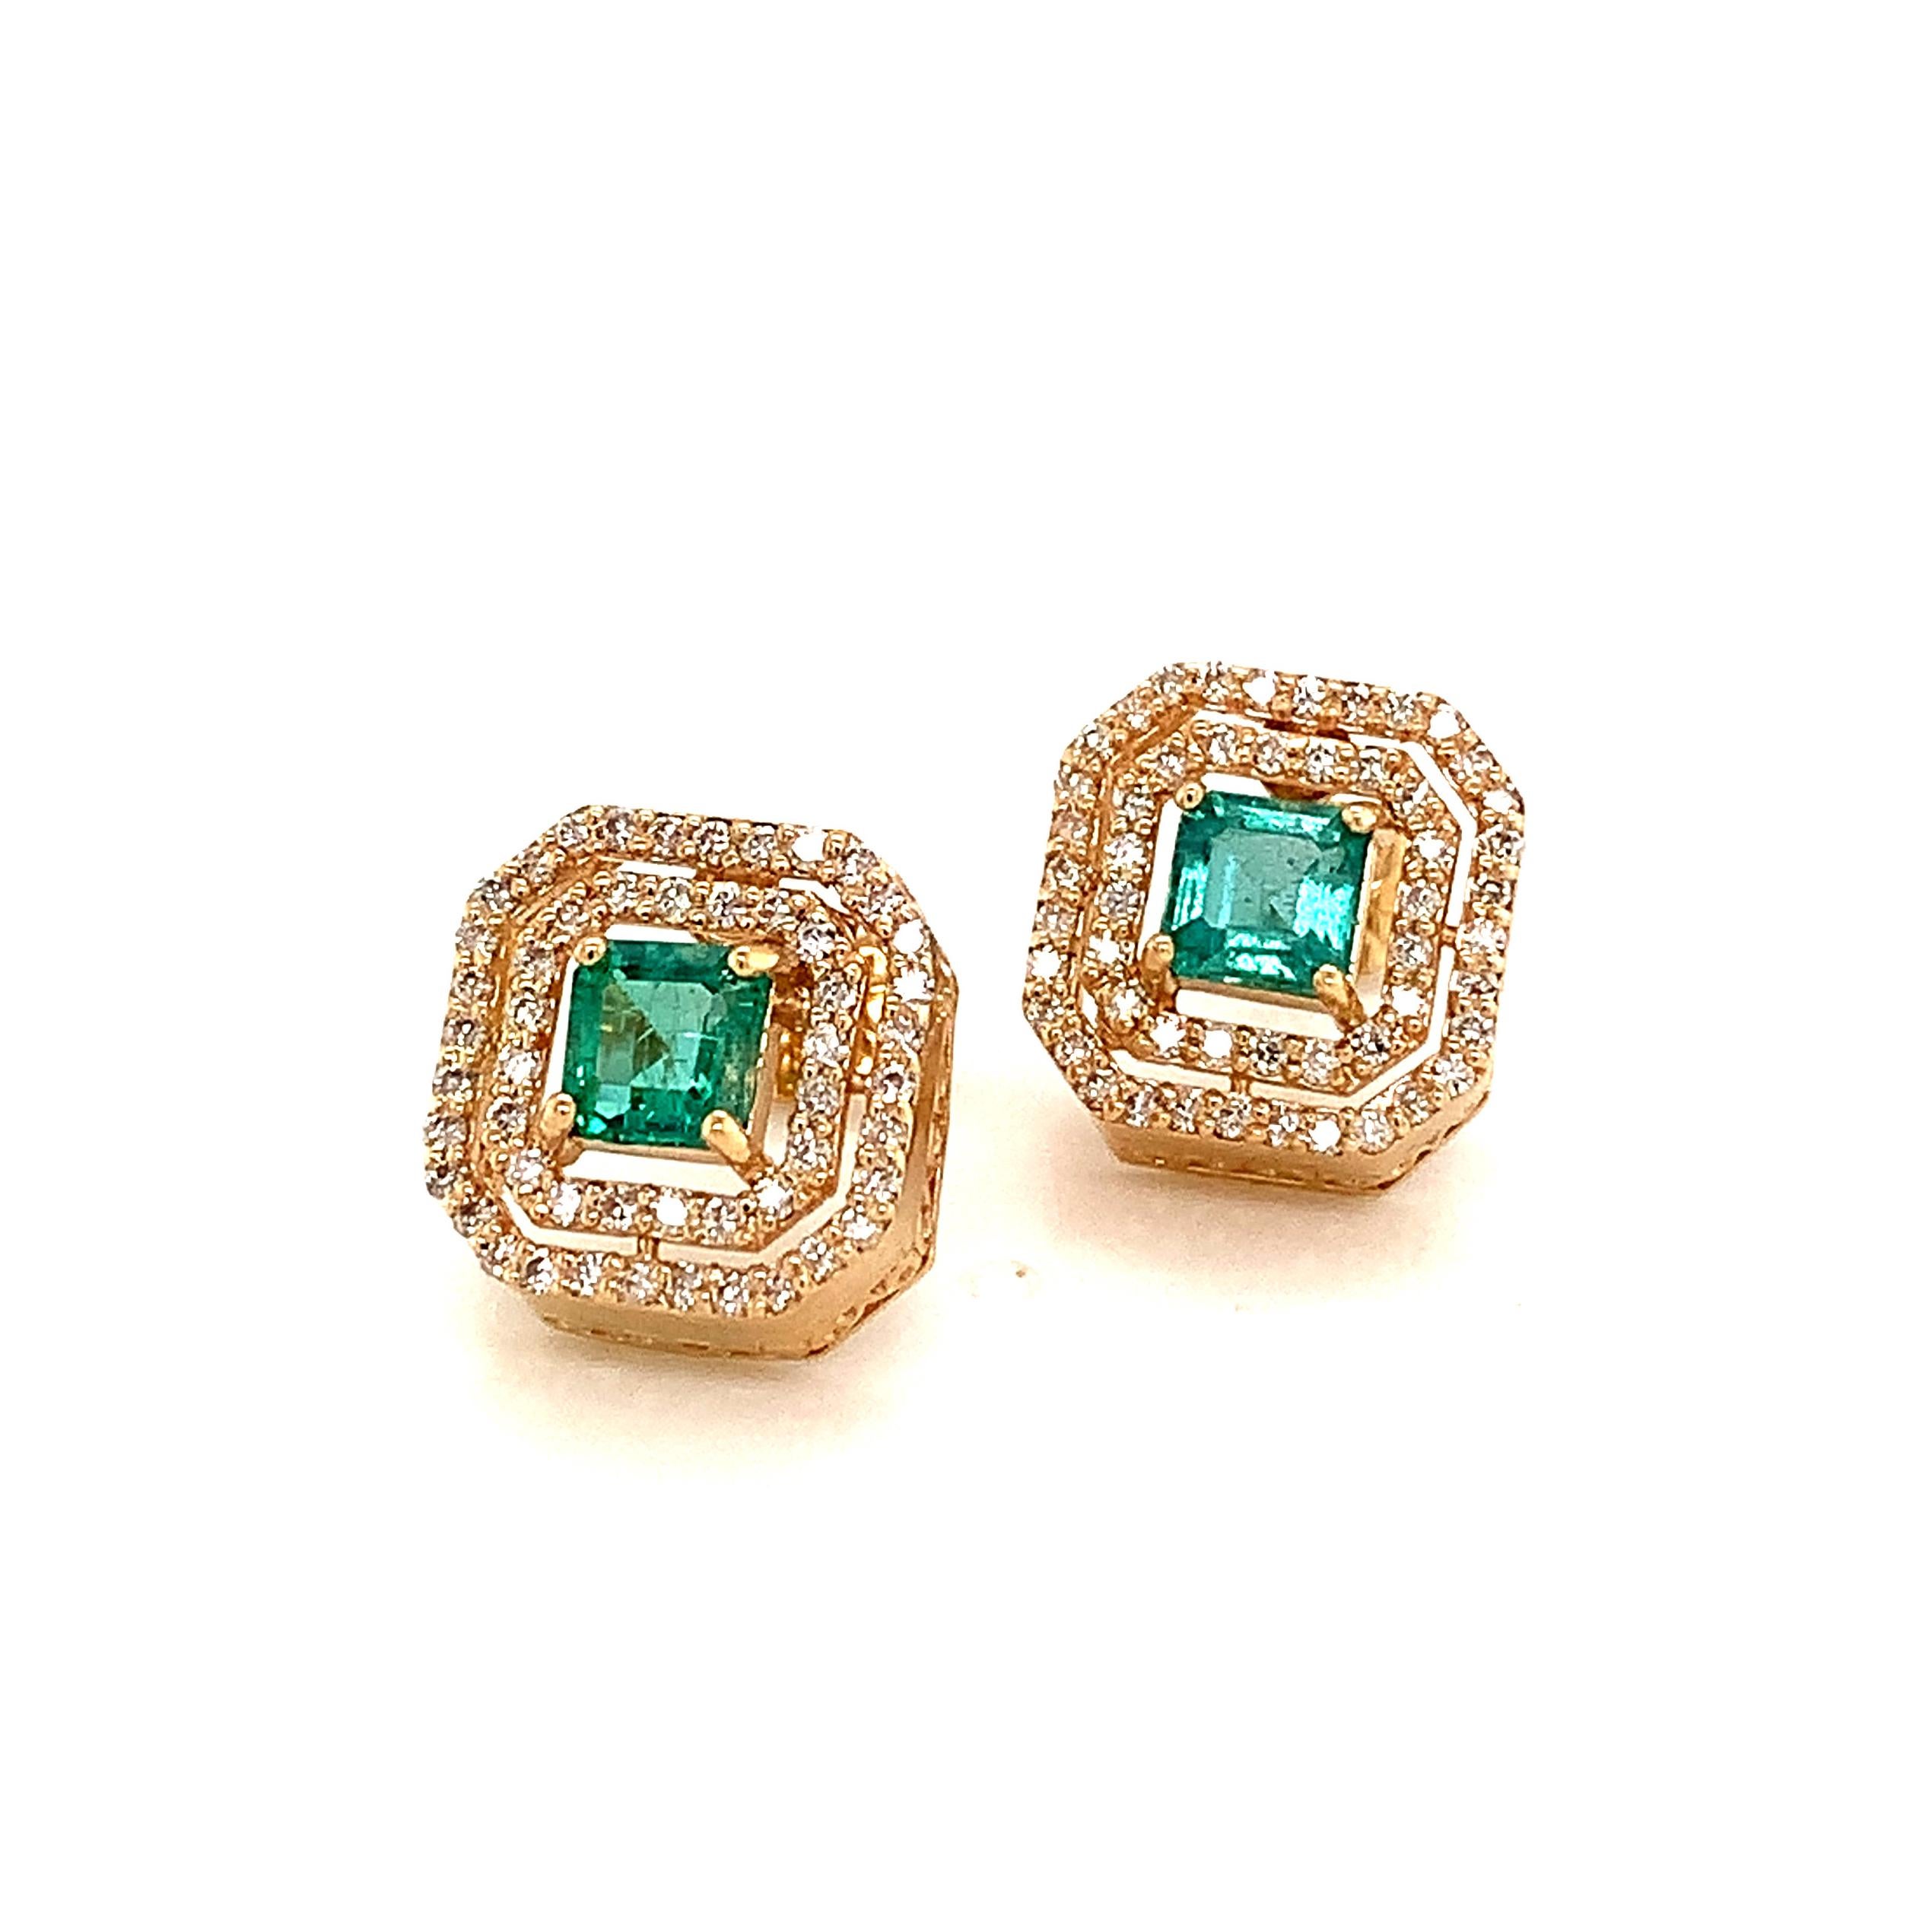 Natural Emerald Diamond Earrings 14k Gold 1.52 TCW Certified For Sale 5